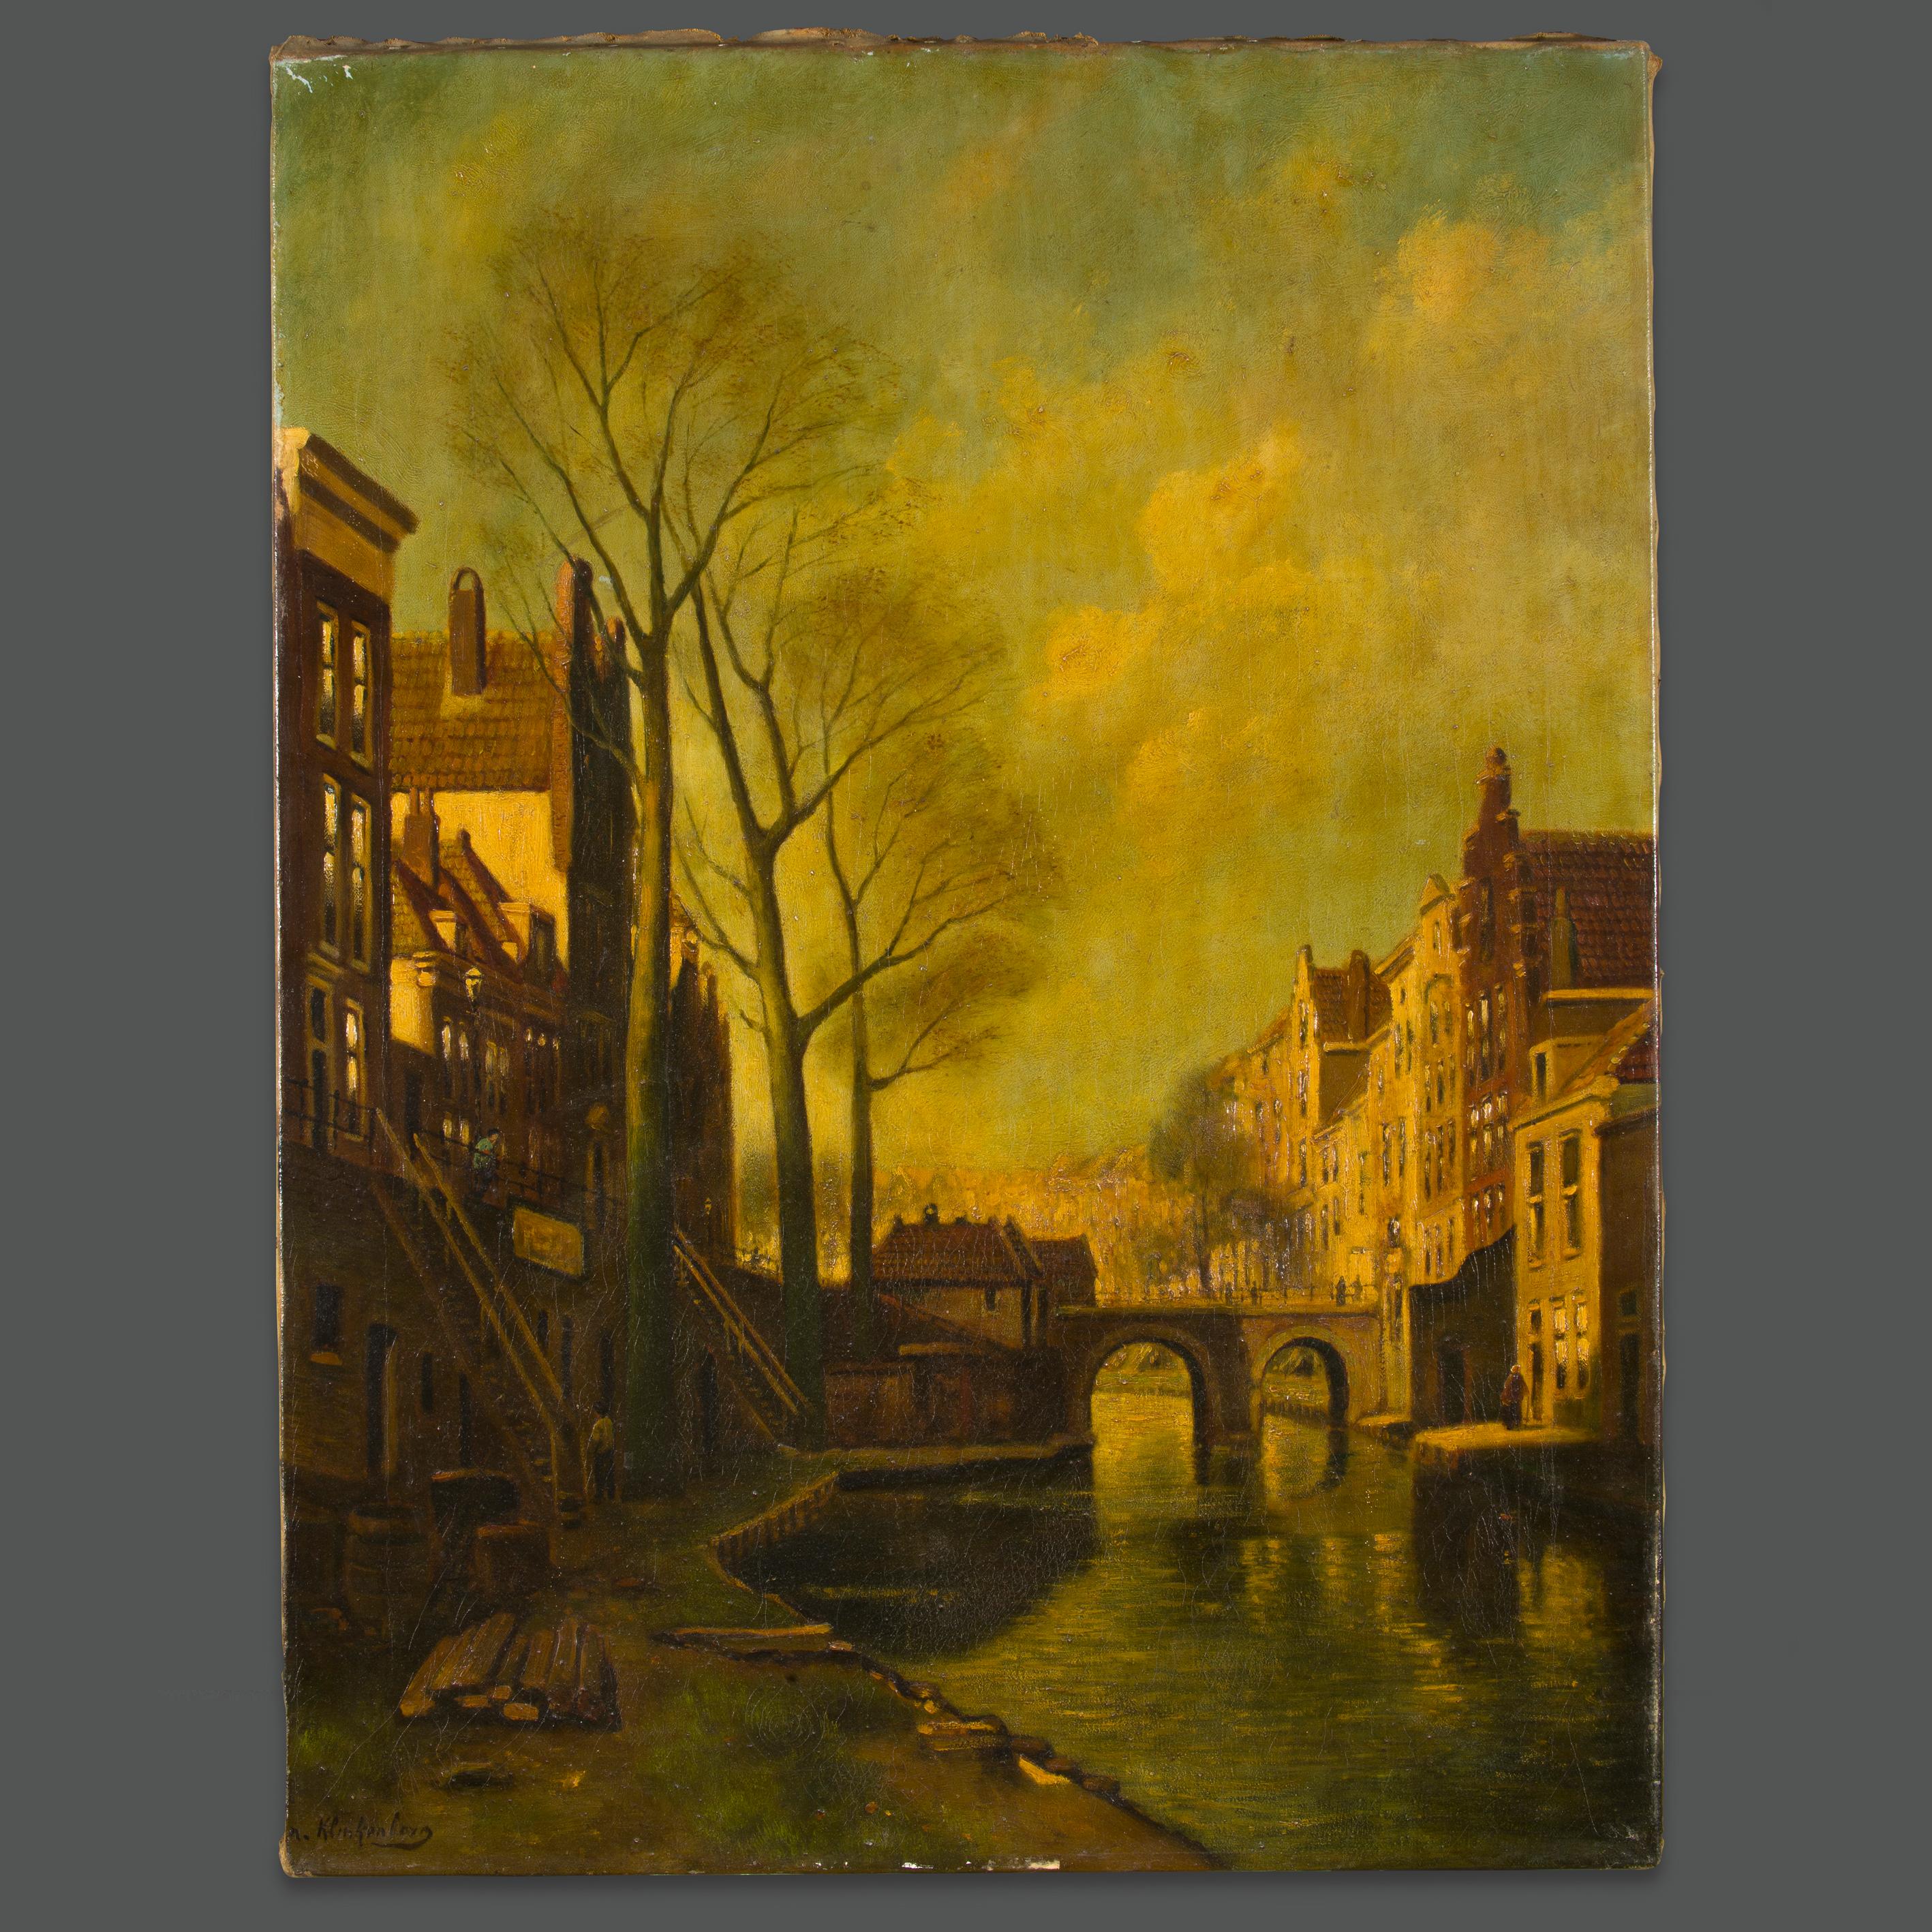 Beautiful and important painting by the great Dutch artist Karel Klinkenberg who lived at the turn of the 19th and 20th centuries.
It depicts a canal in Utrecht depicted with his usual precision attentive to every detail.
Another characteristic of